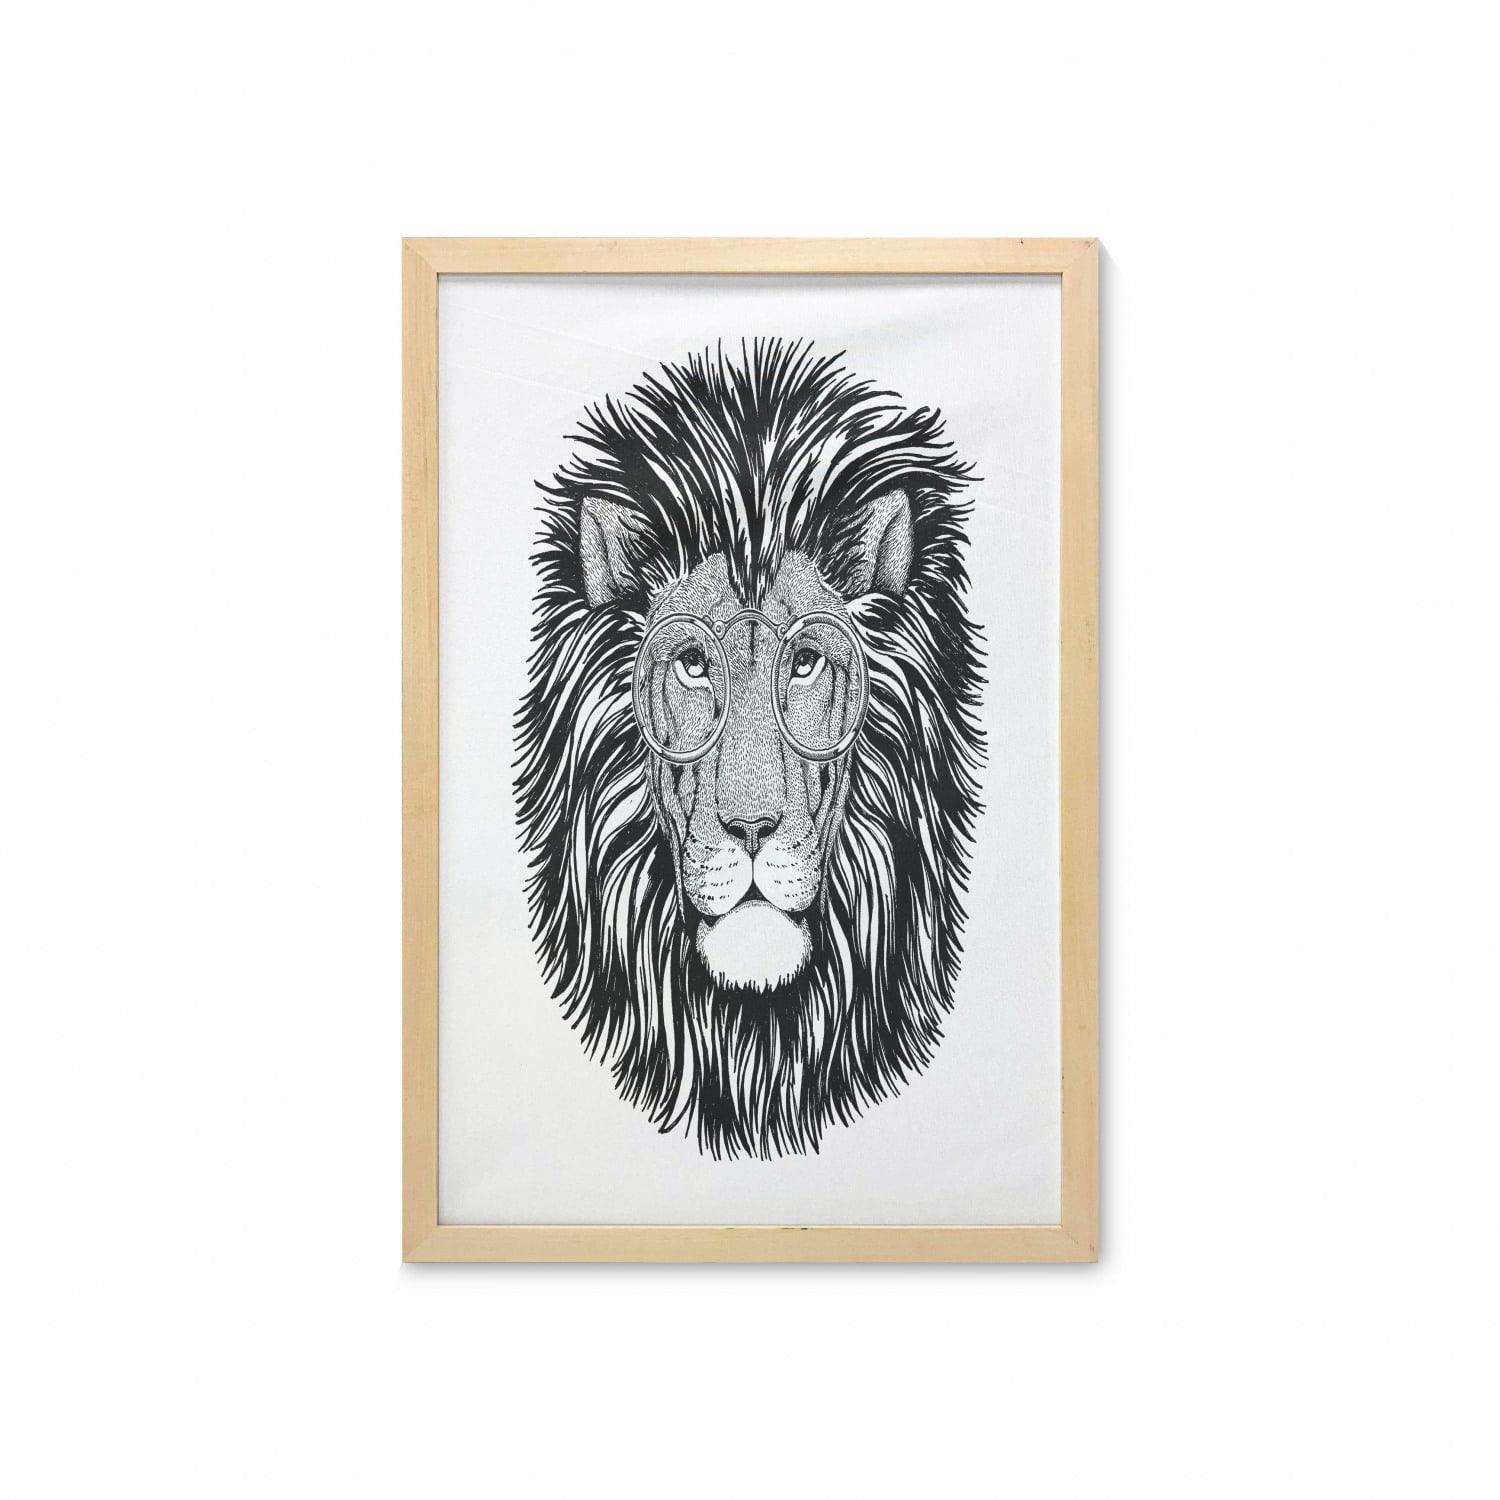 Hipster Animals Lion Glasses Vintage SINGLE  Canvas Art Print Box Framed Picture Wall Hanging